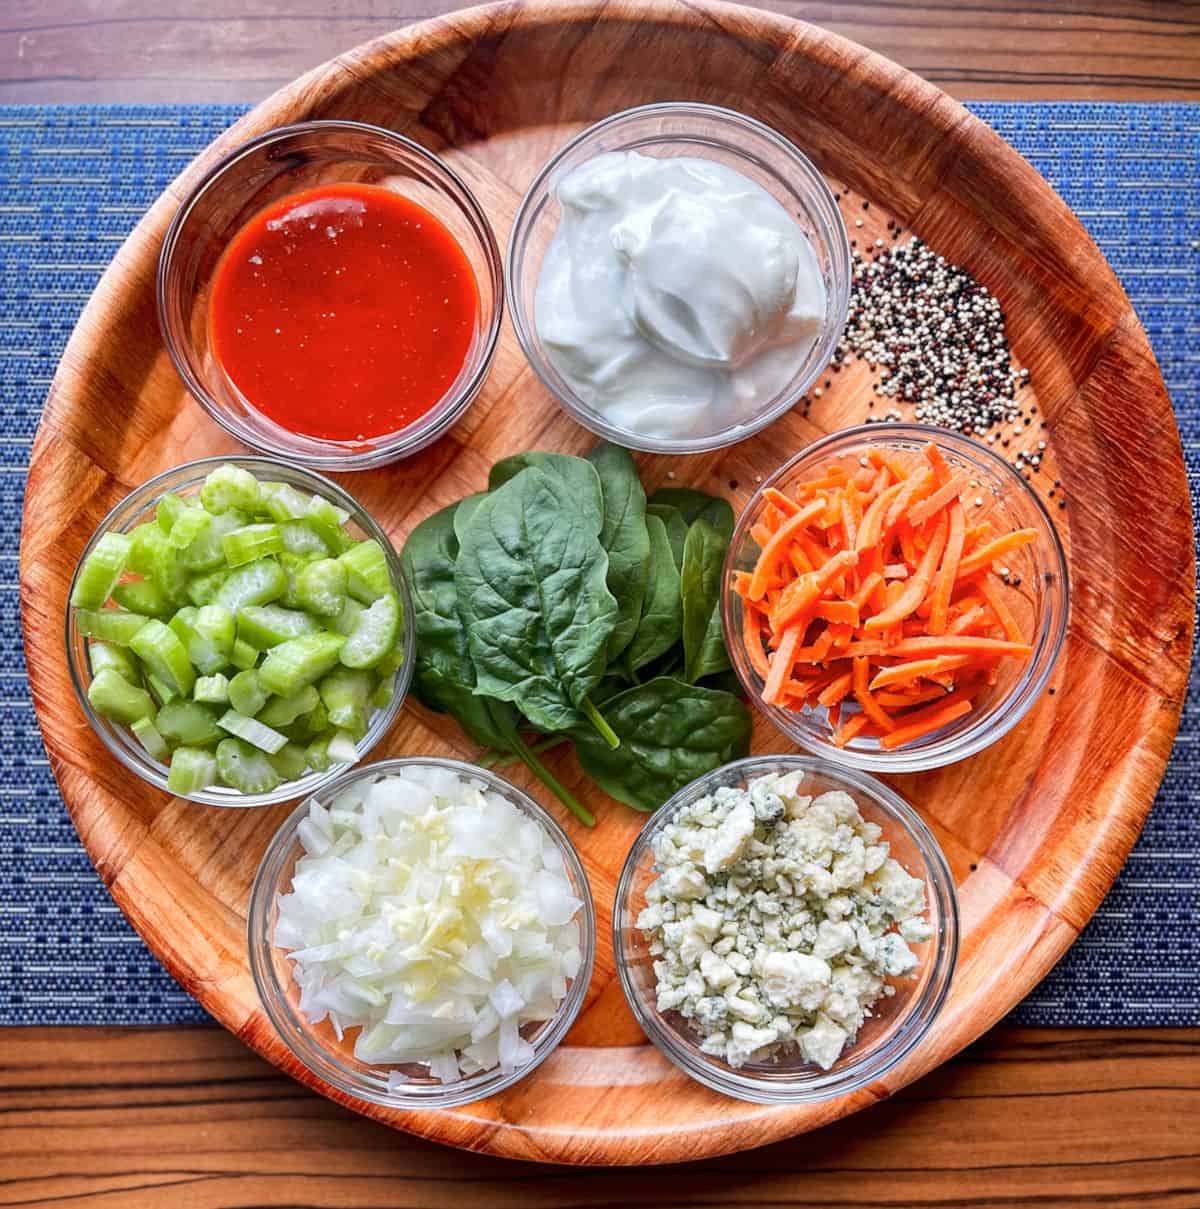 buffalo ground turkey quinoa bowl ingredients on a round wooden platter in clear glass ramekins and a pile of fresh baby spinach in the middle and dry tri colored quinoa off to the side. The ramekins have white ones minced, crumbled blue cheese, shredded carrots, minced celery, greek yogurt, and buffalo sauce in each of them. The platter is on a blue placemat.